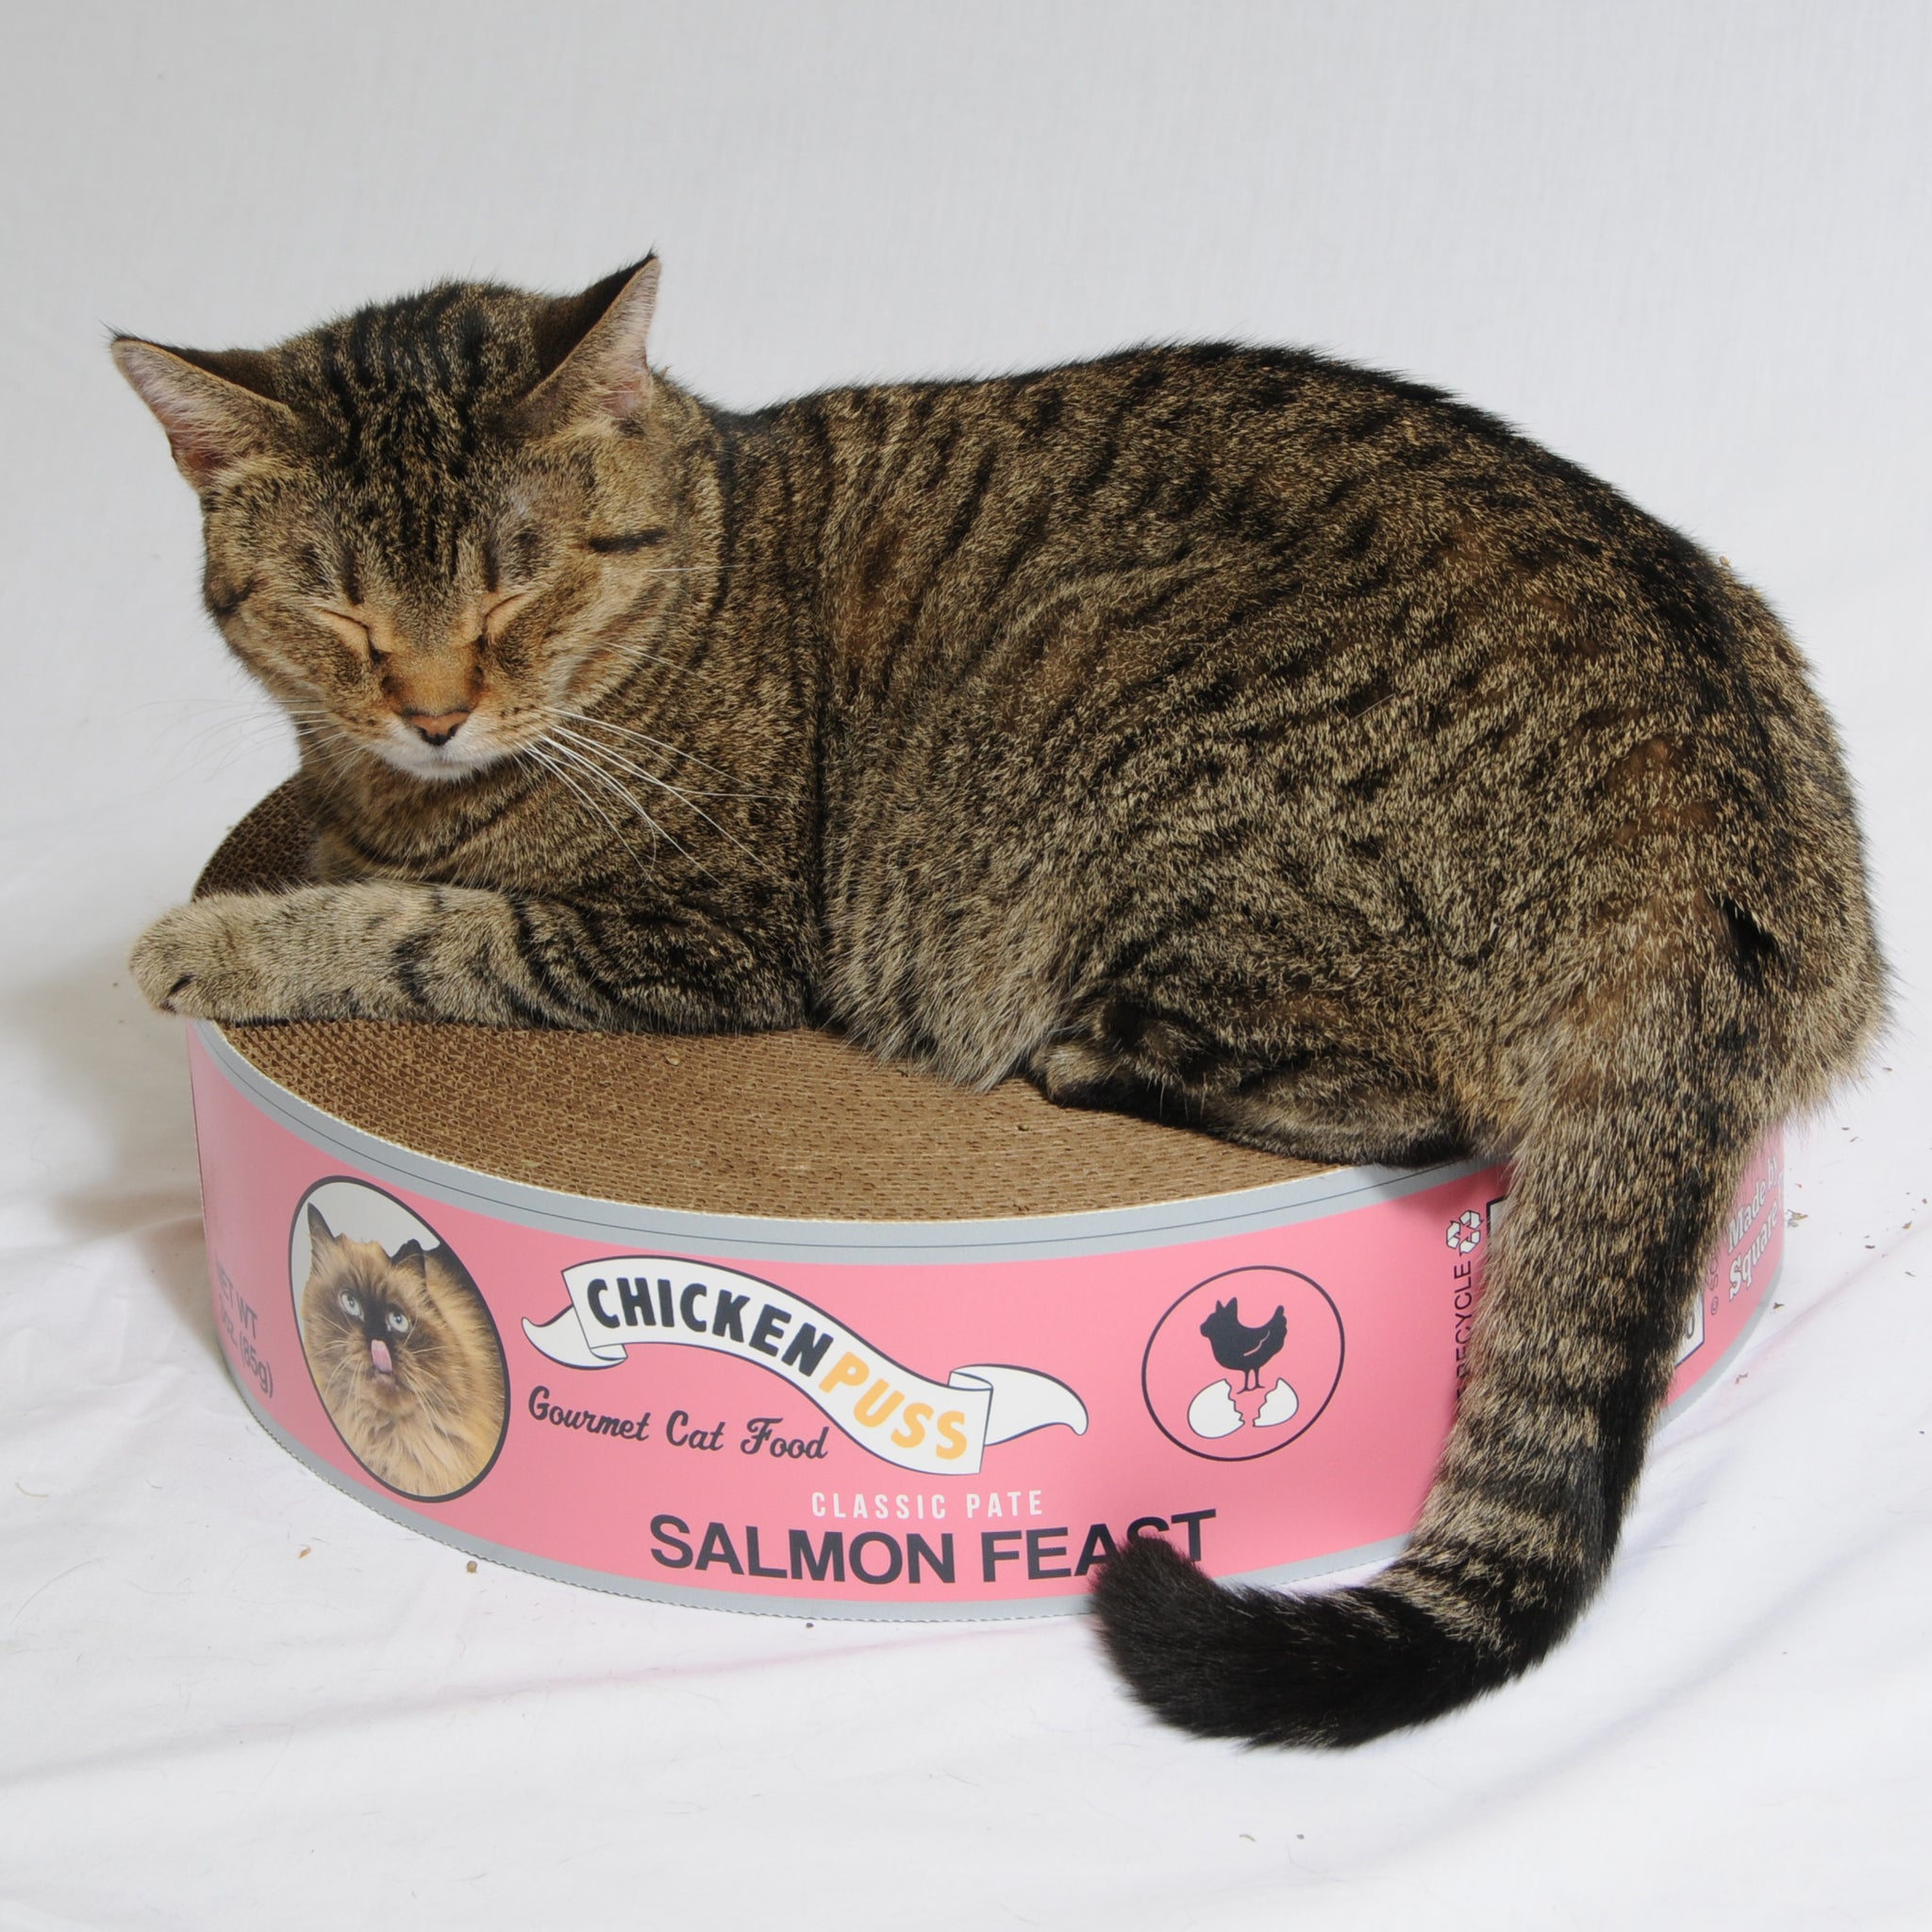 The Endless Buffet Scratch Pad by Square Paws